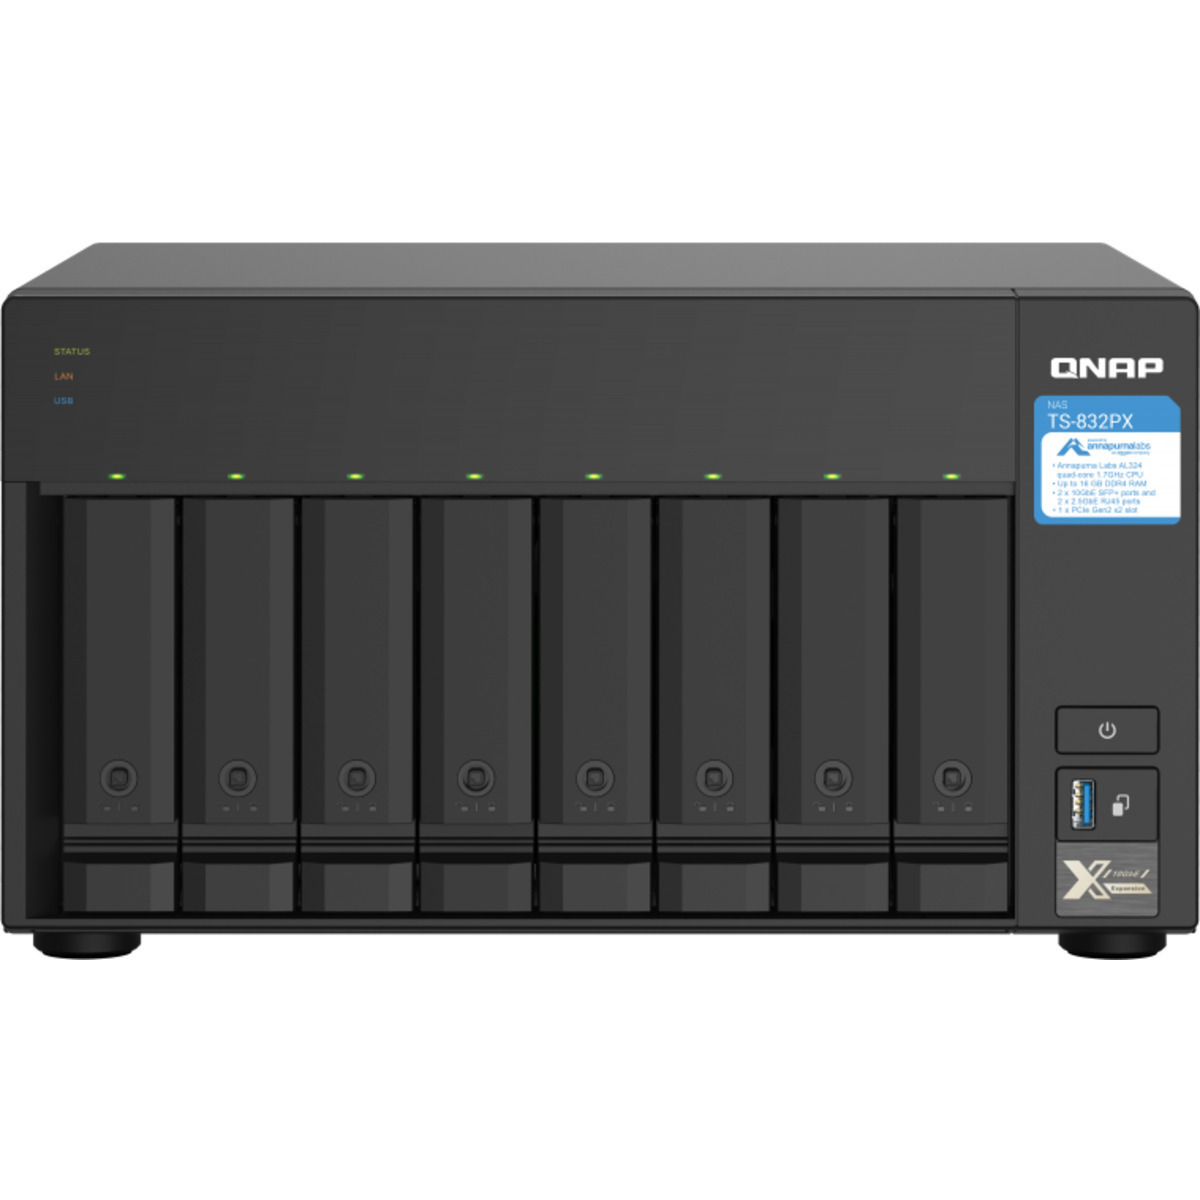 QNAP TS-832PX 84tb 8-Bay Desktop Multimedia / Power User / Business NAS - Network Attached Storage Device 7x12tb Western Digital Gold WD121KRYZ 3.5 7200rpm SATA 6Gb/s HDD ENTERPRISE Class Drives Installed - Burn-In Tested - FREE RAM UPGRADE TS-832PX